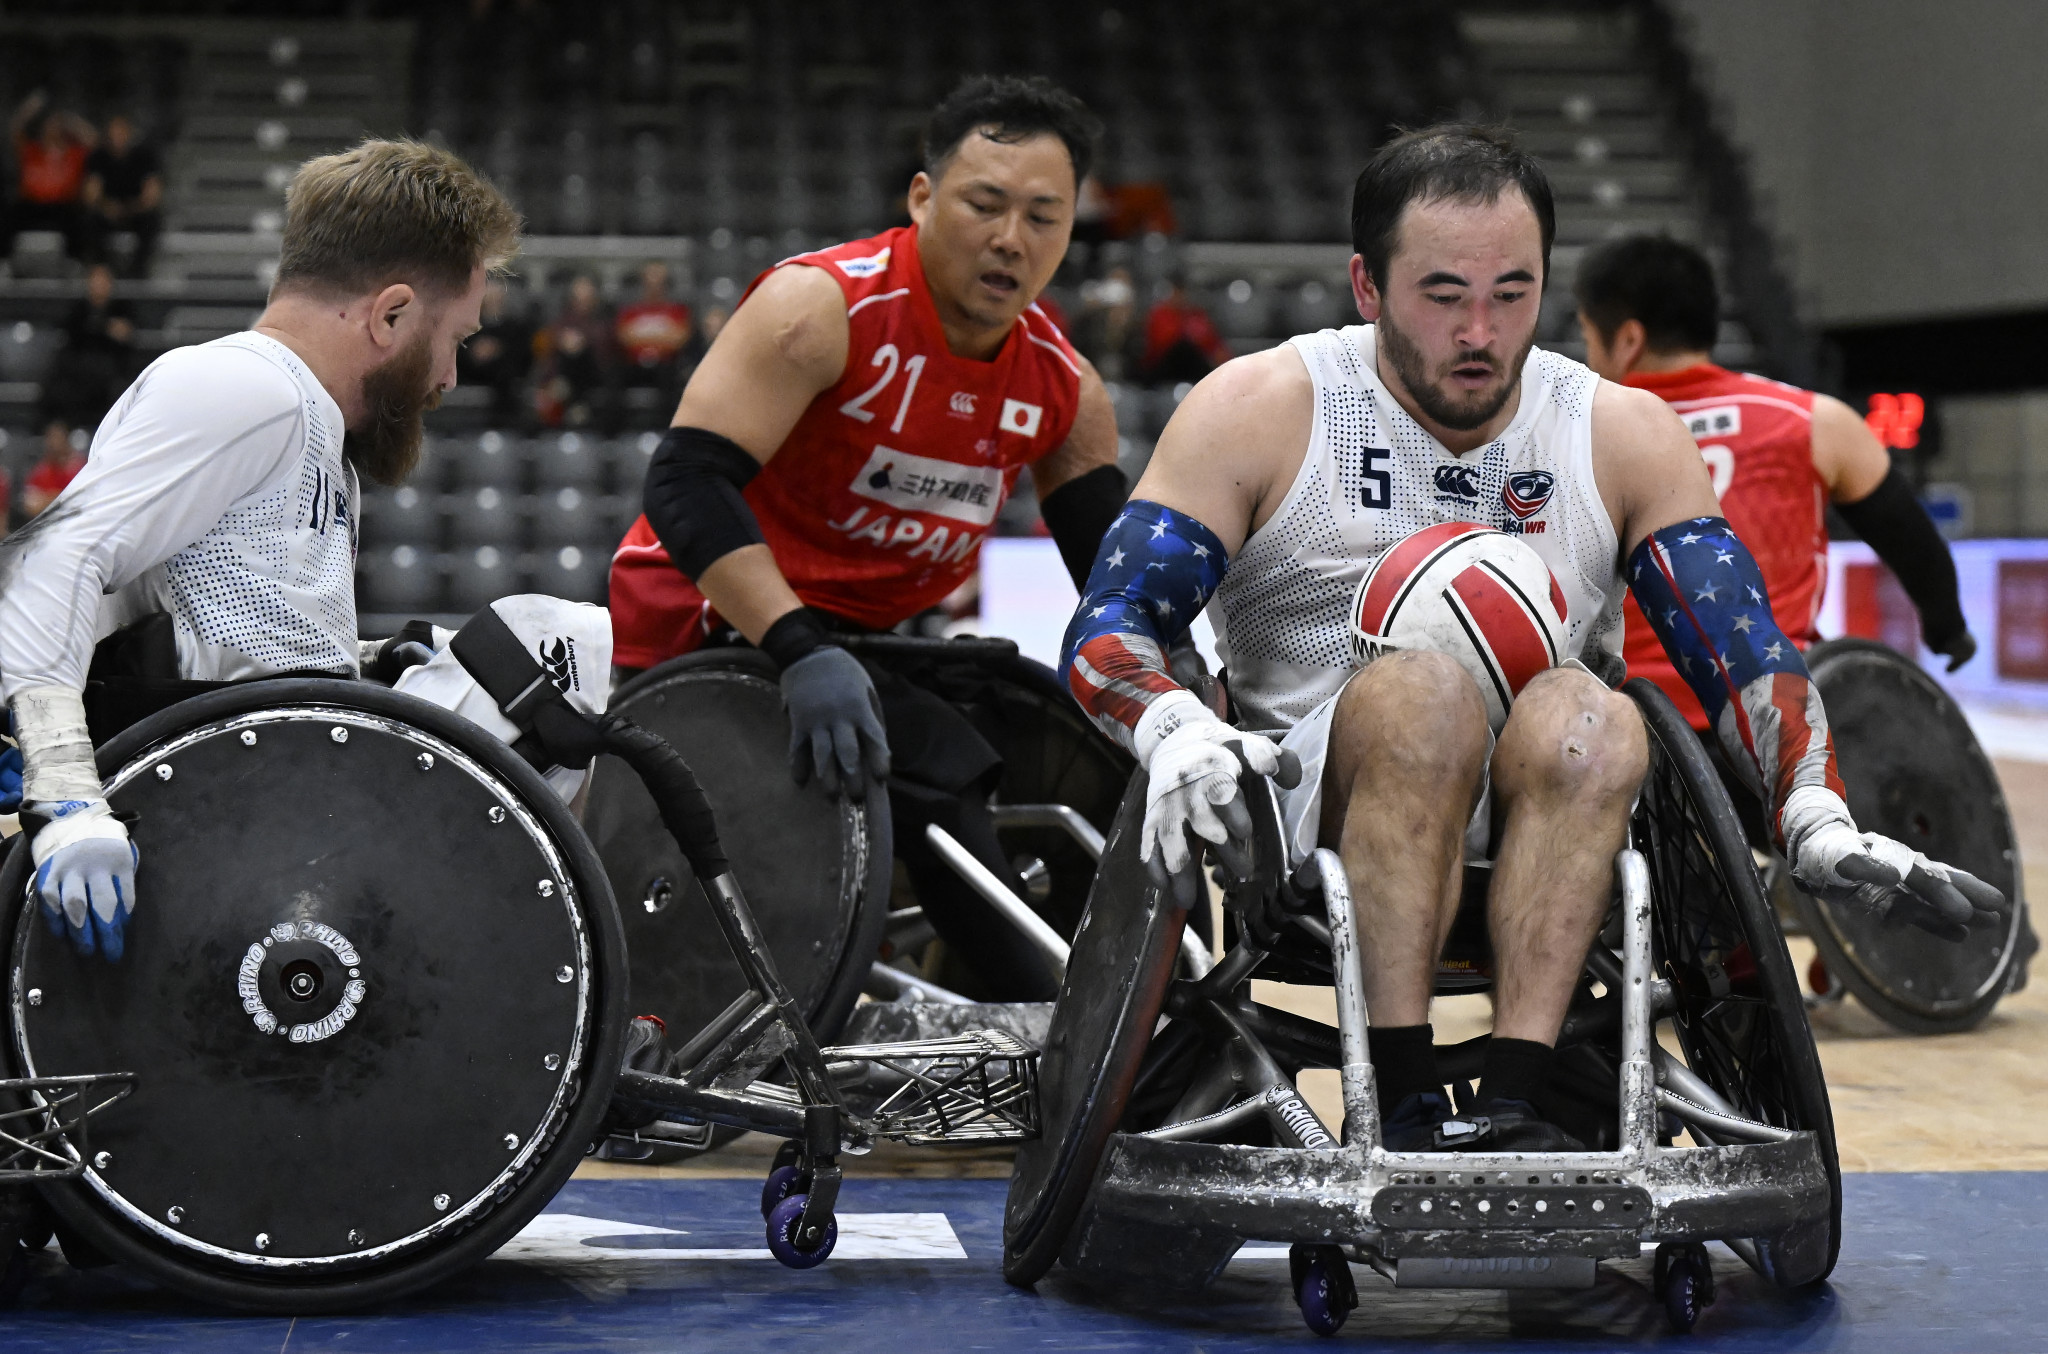 The United States were clinical to defeat Japan ©Lars Møller/Parasport Denmark